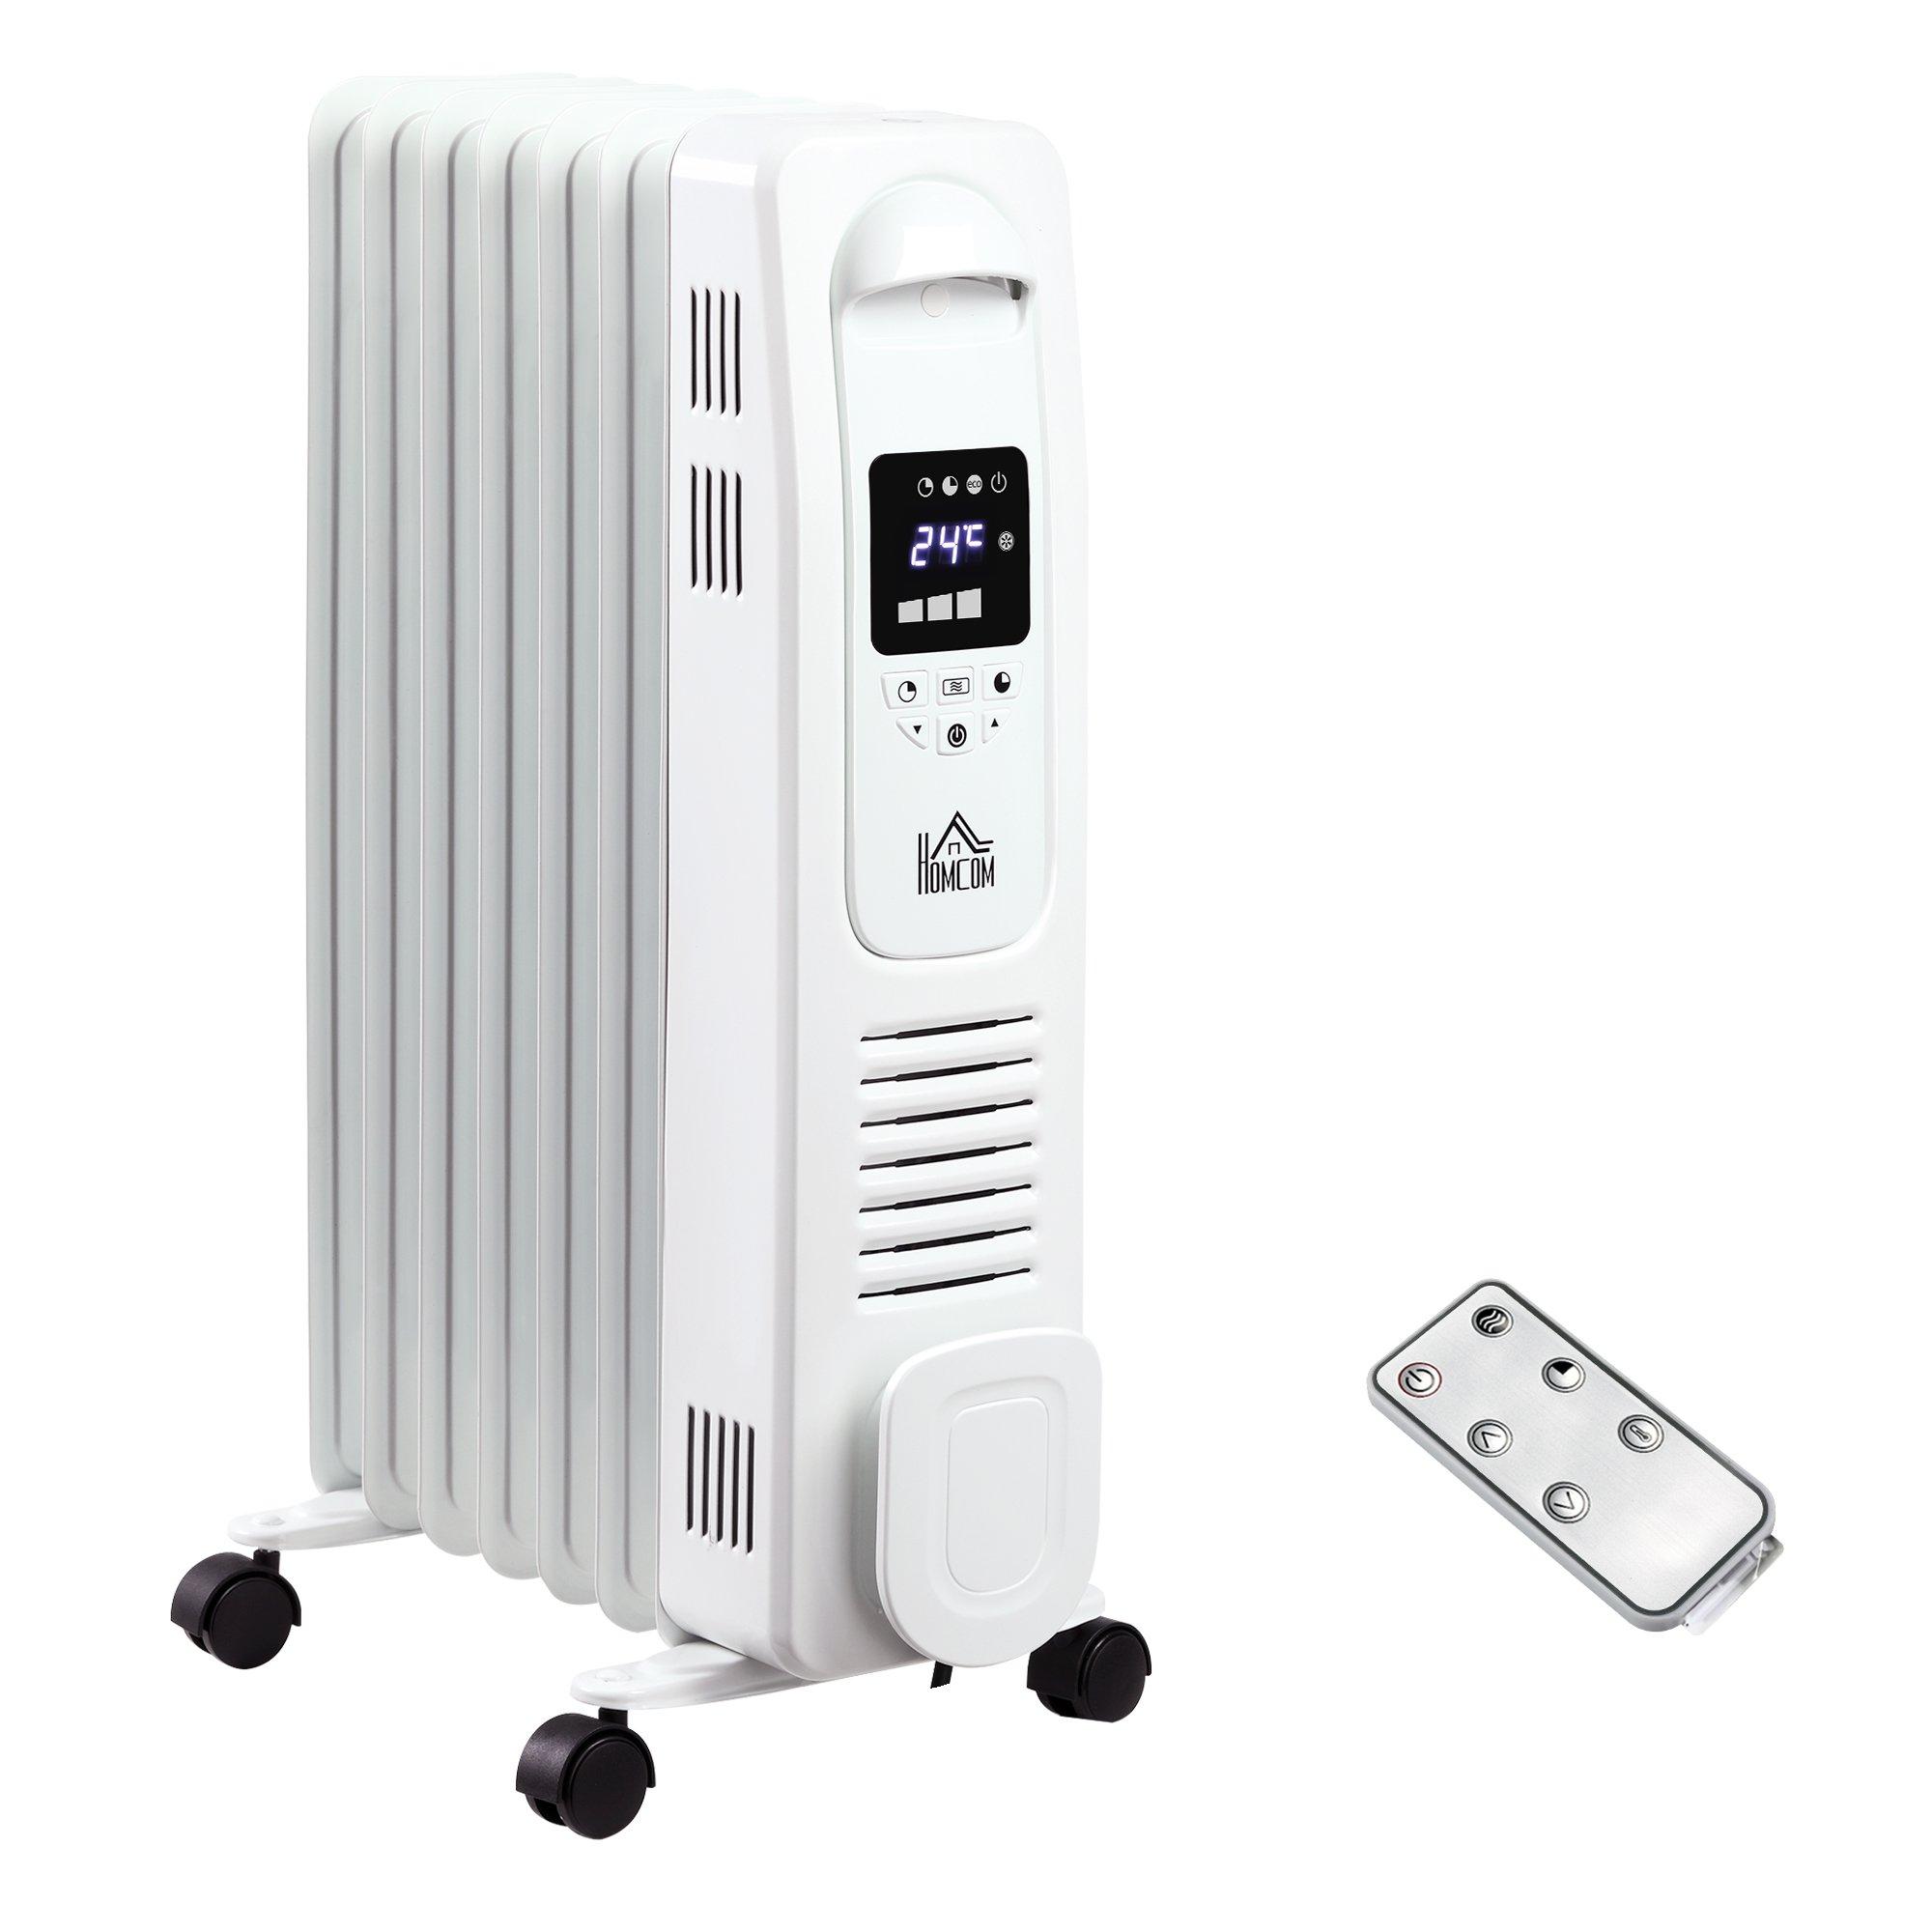 Oil Filled Radiator, 7 Fin Portable Heater with Timer Remote Control